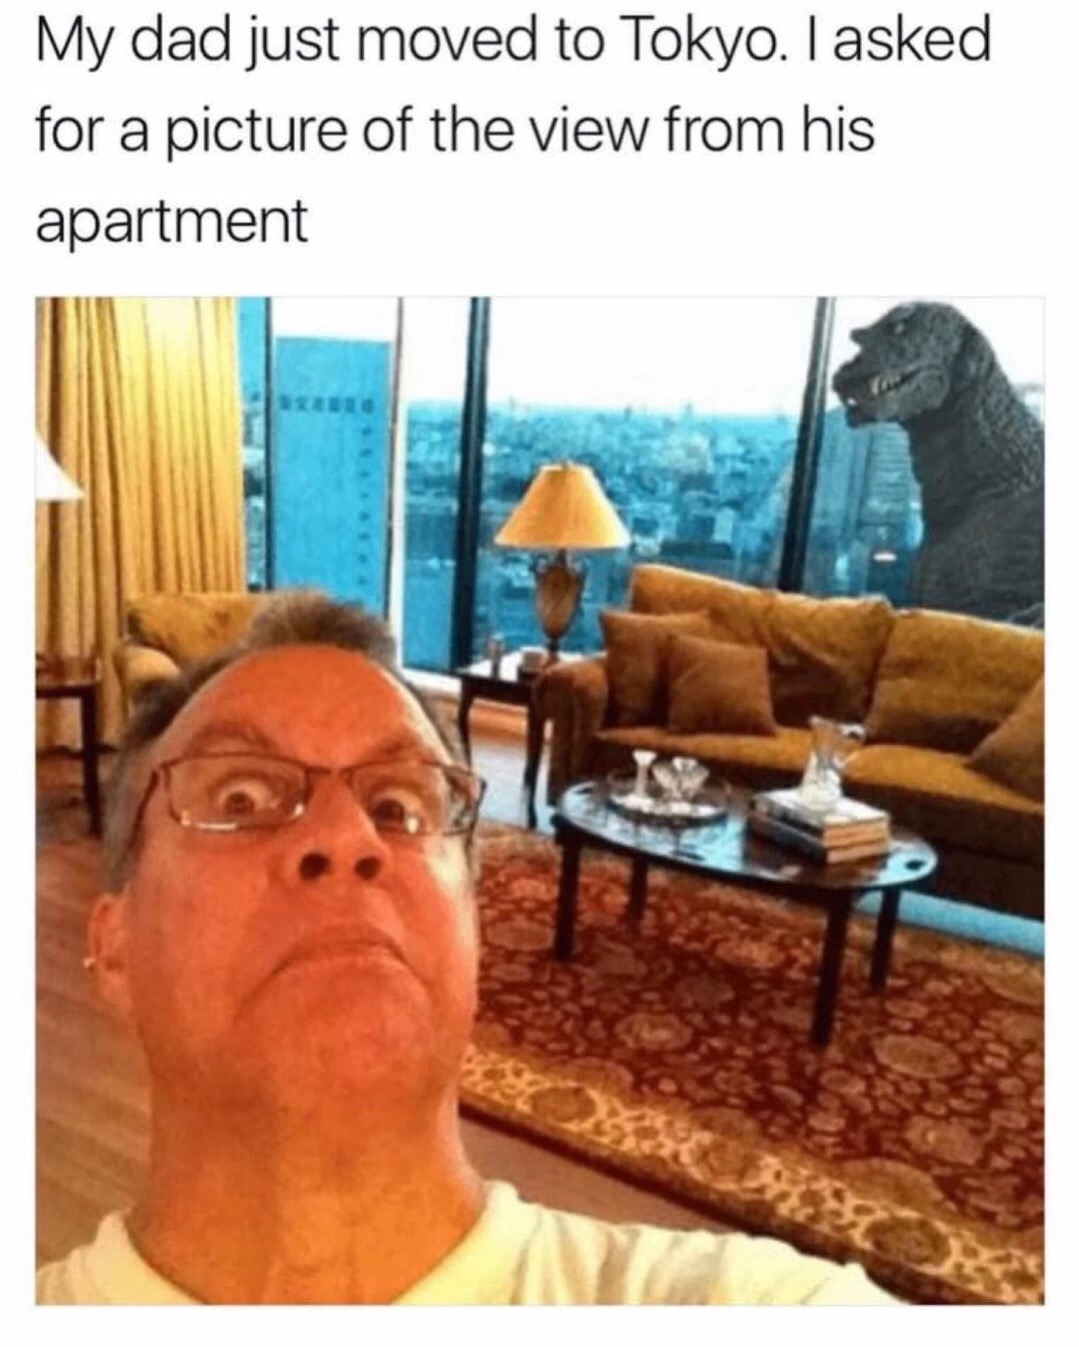 memes - dads being funny - My dad just moved to Tokyo. I asked for a picture of the view from his apartment